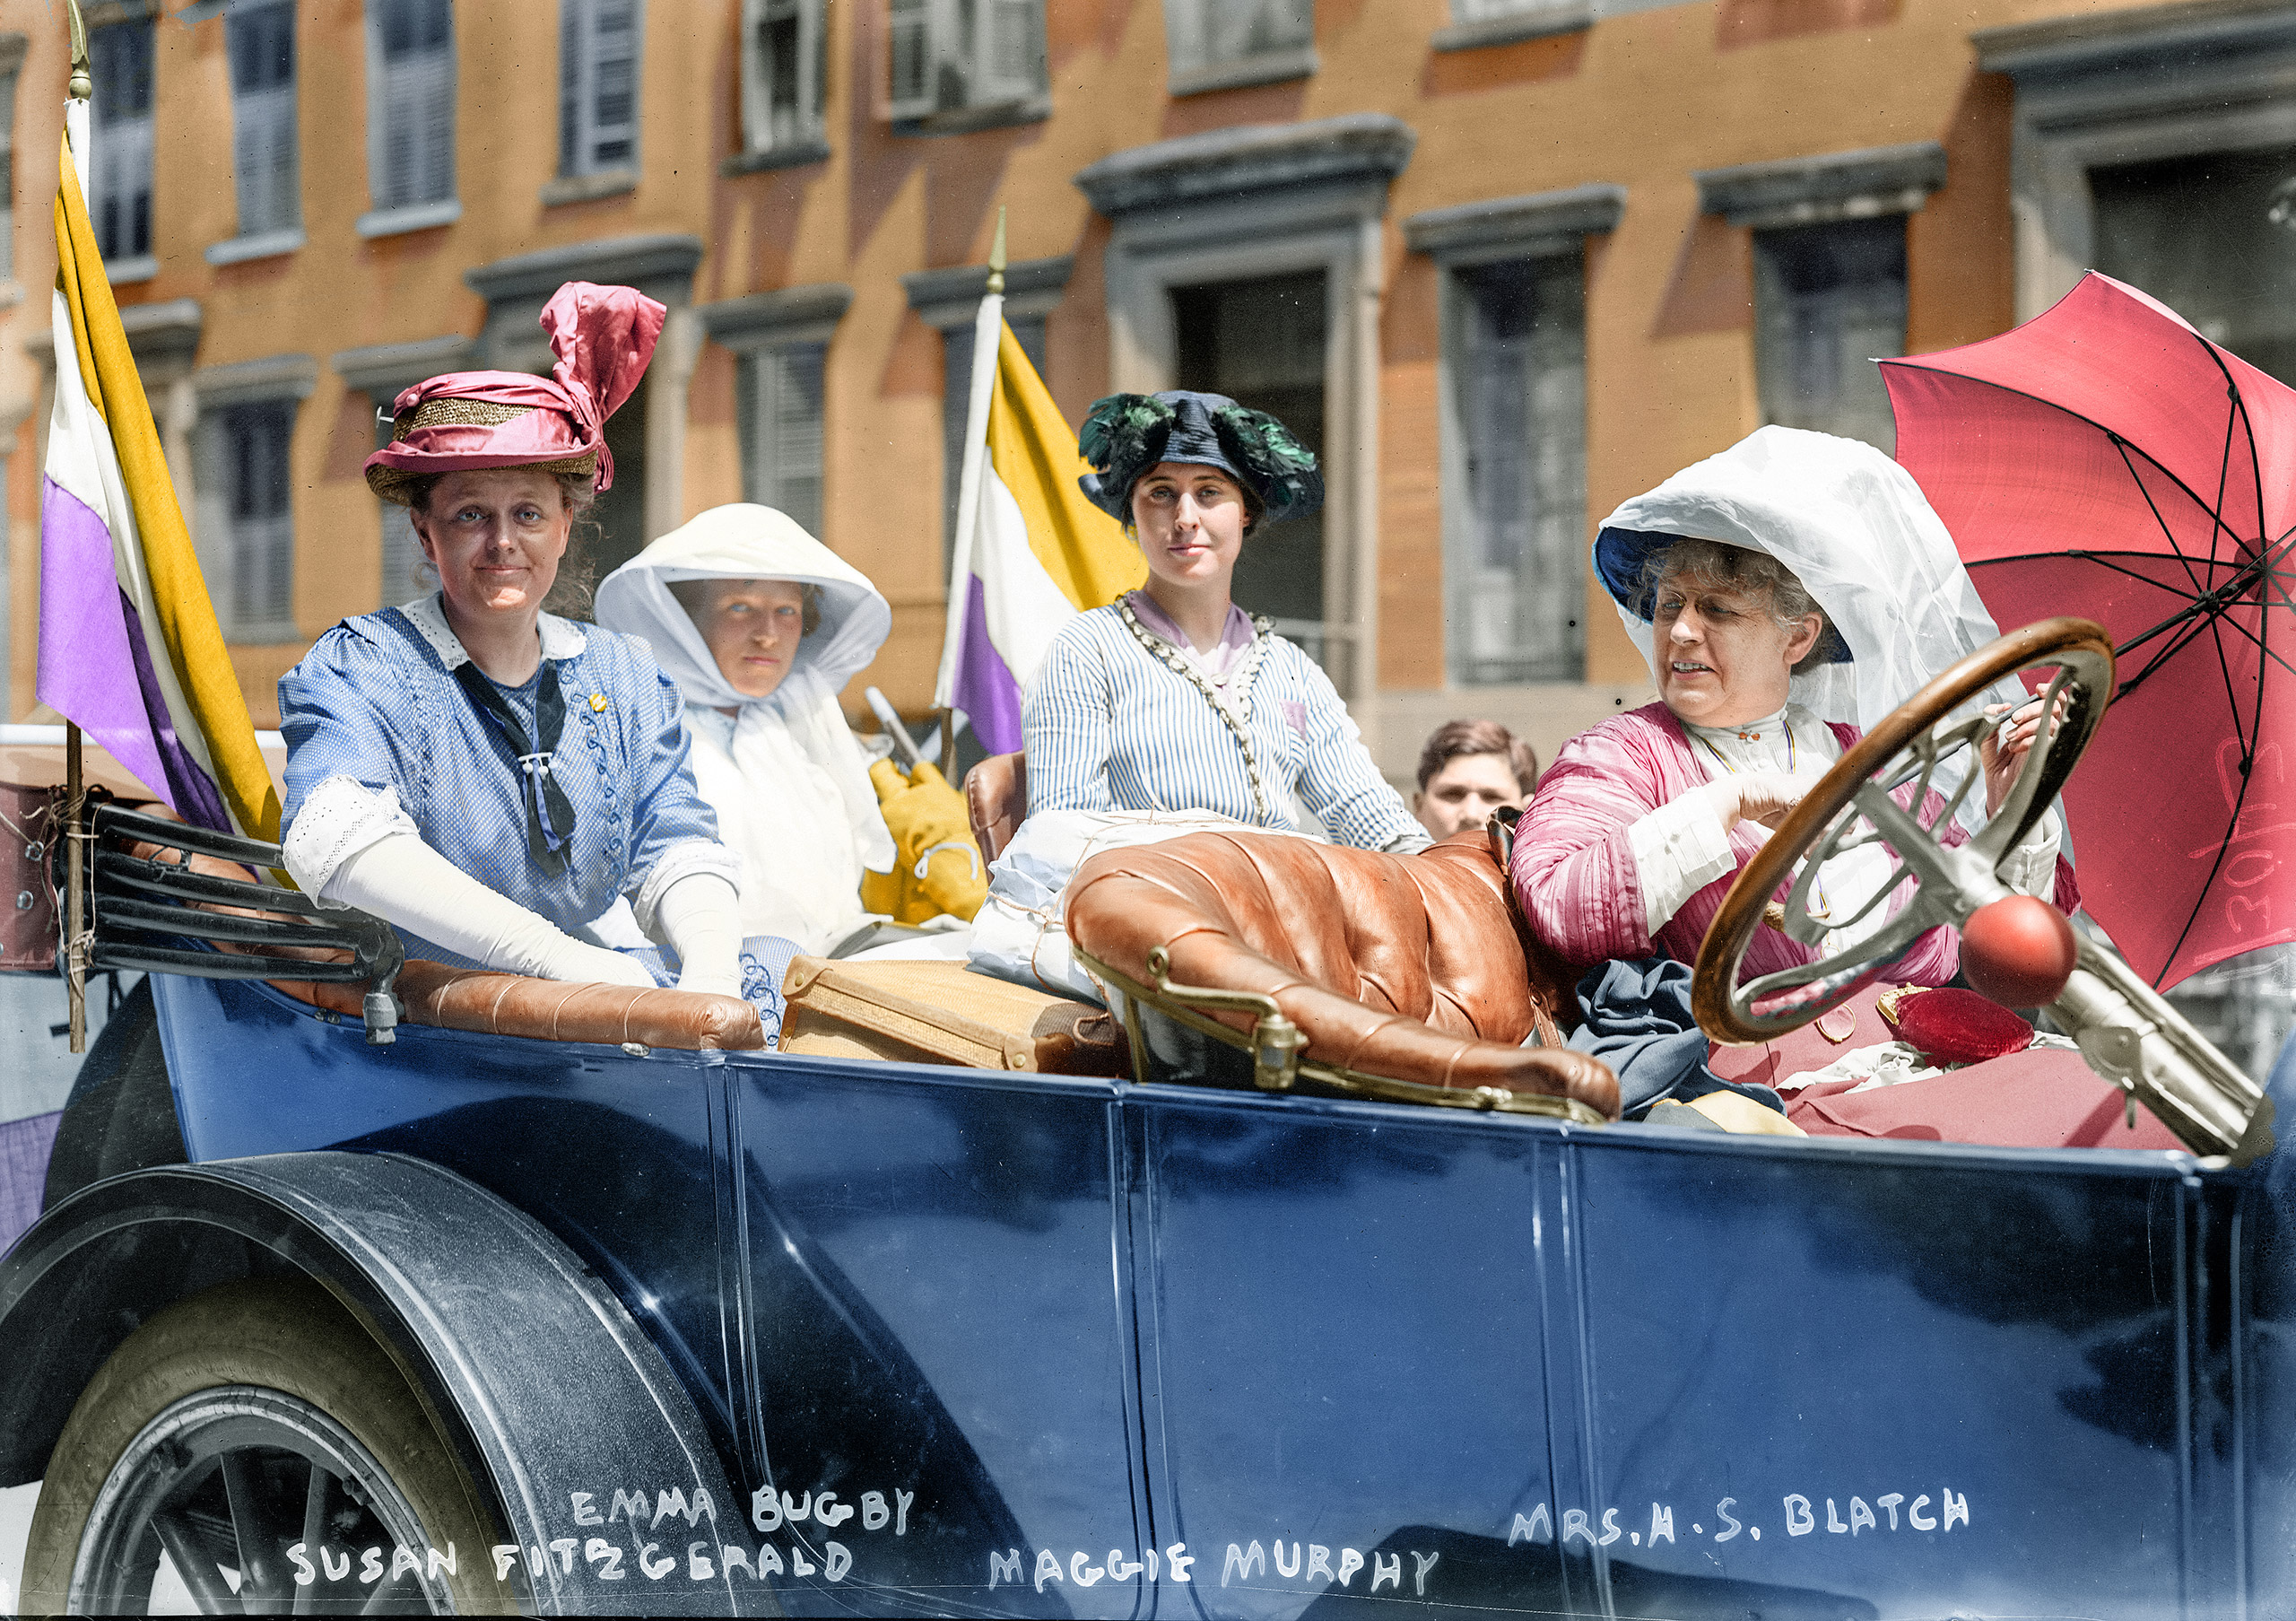 Suffragists Susan Walker Fitzgerald, Emma Bugbee, Maggie Murphy and Harriot Stanton Blatch at a women's suffrage parade in New York City, July 30, 1913.